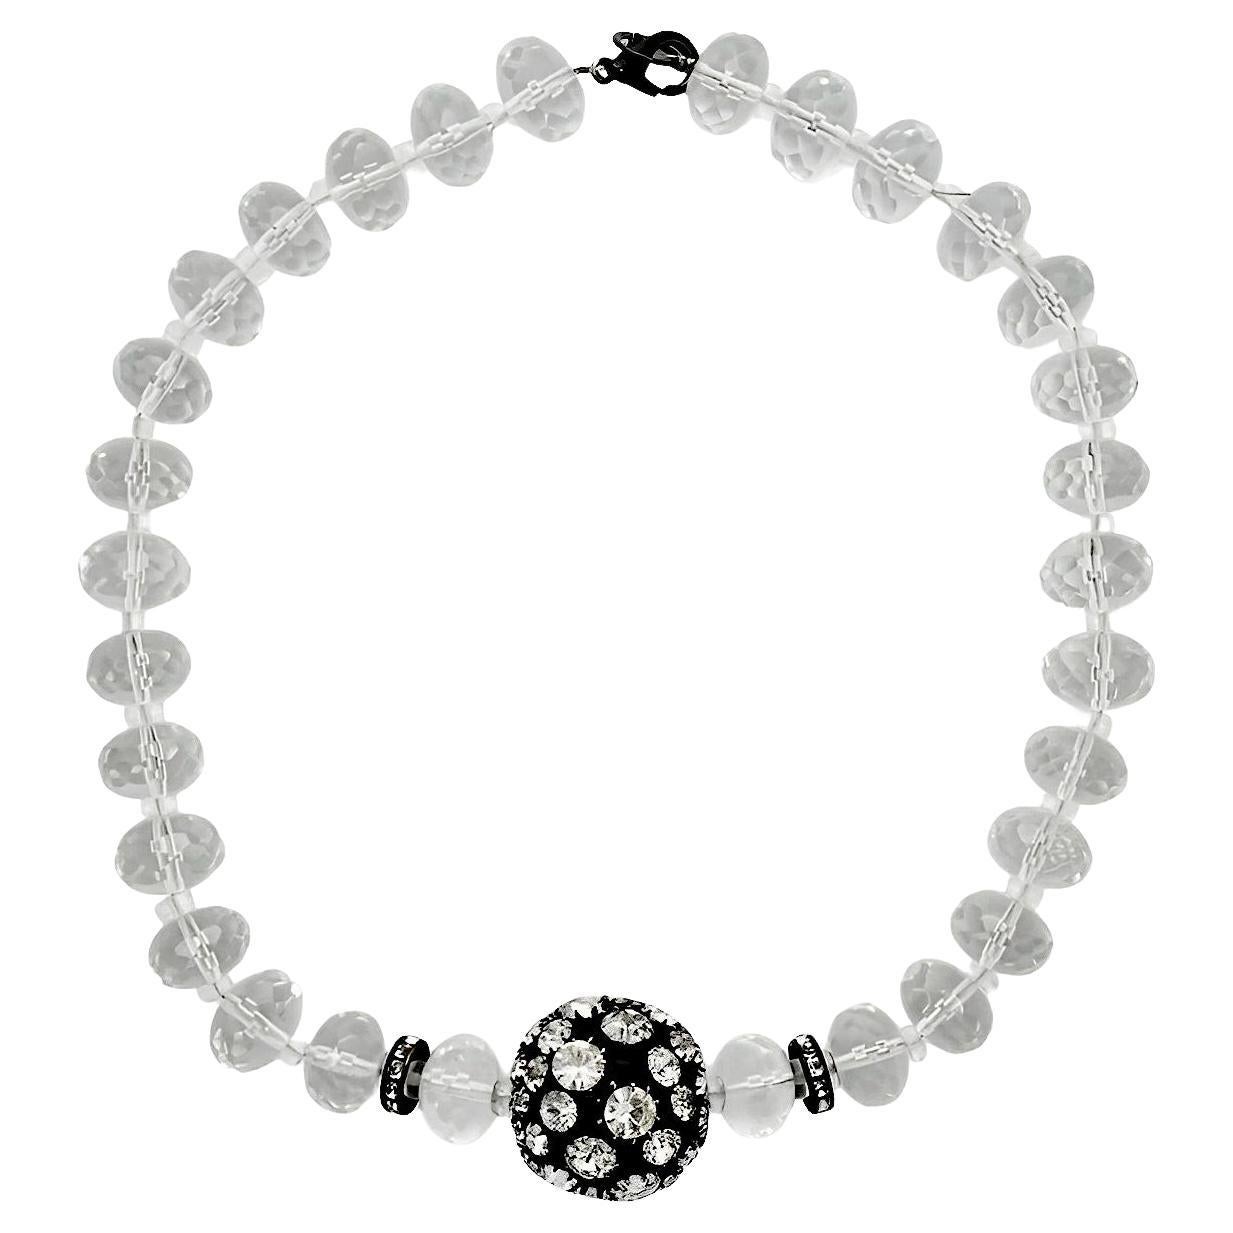 Clear Faceted Glass Beaded Necklace with Black Enamel and Crystal Ball